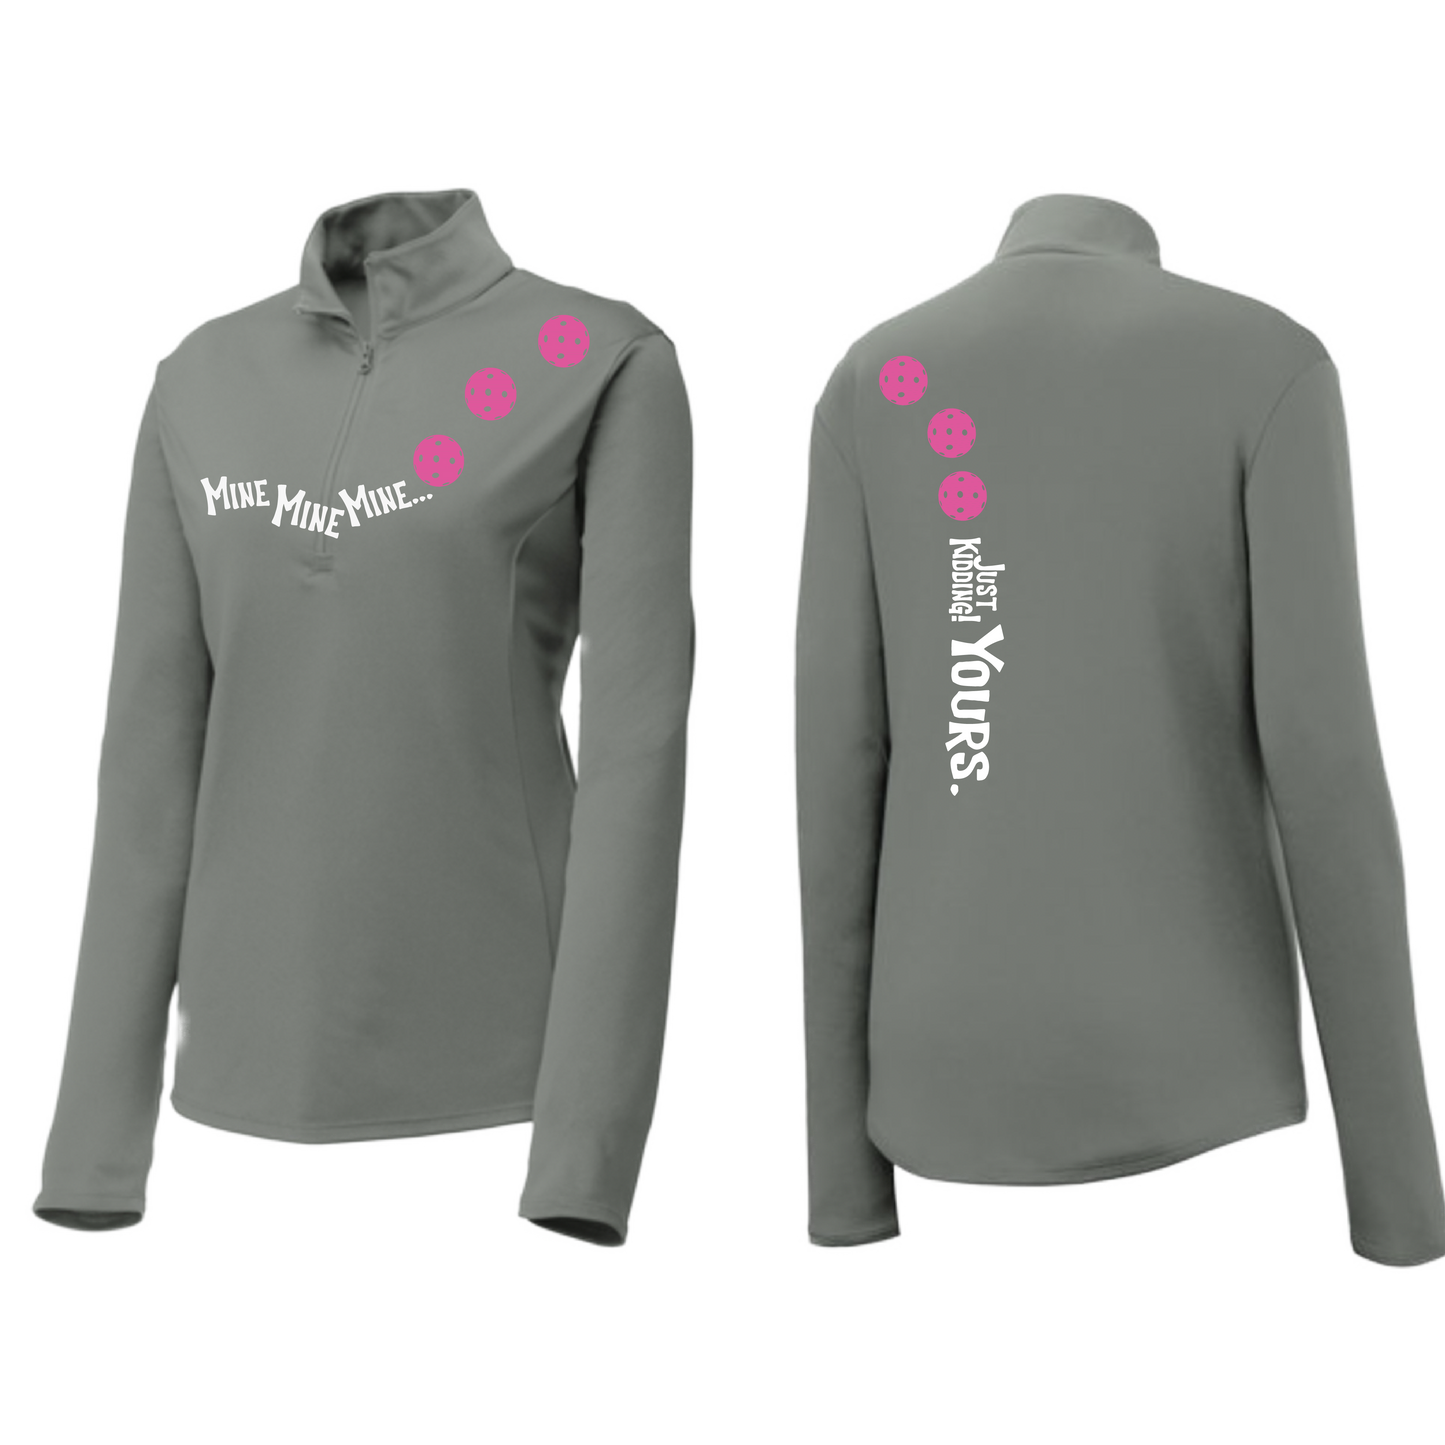 Mine JK Yours (Pickleball Colors Green Rainbow or Pink) | Women's 1/4 Zip Pickleball Pullover | 100% Polyester